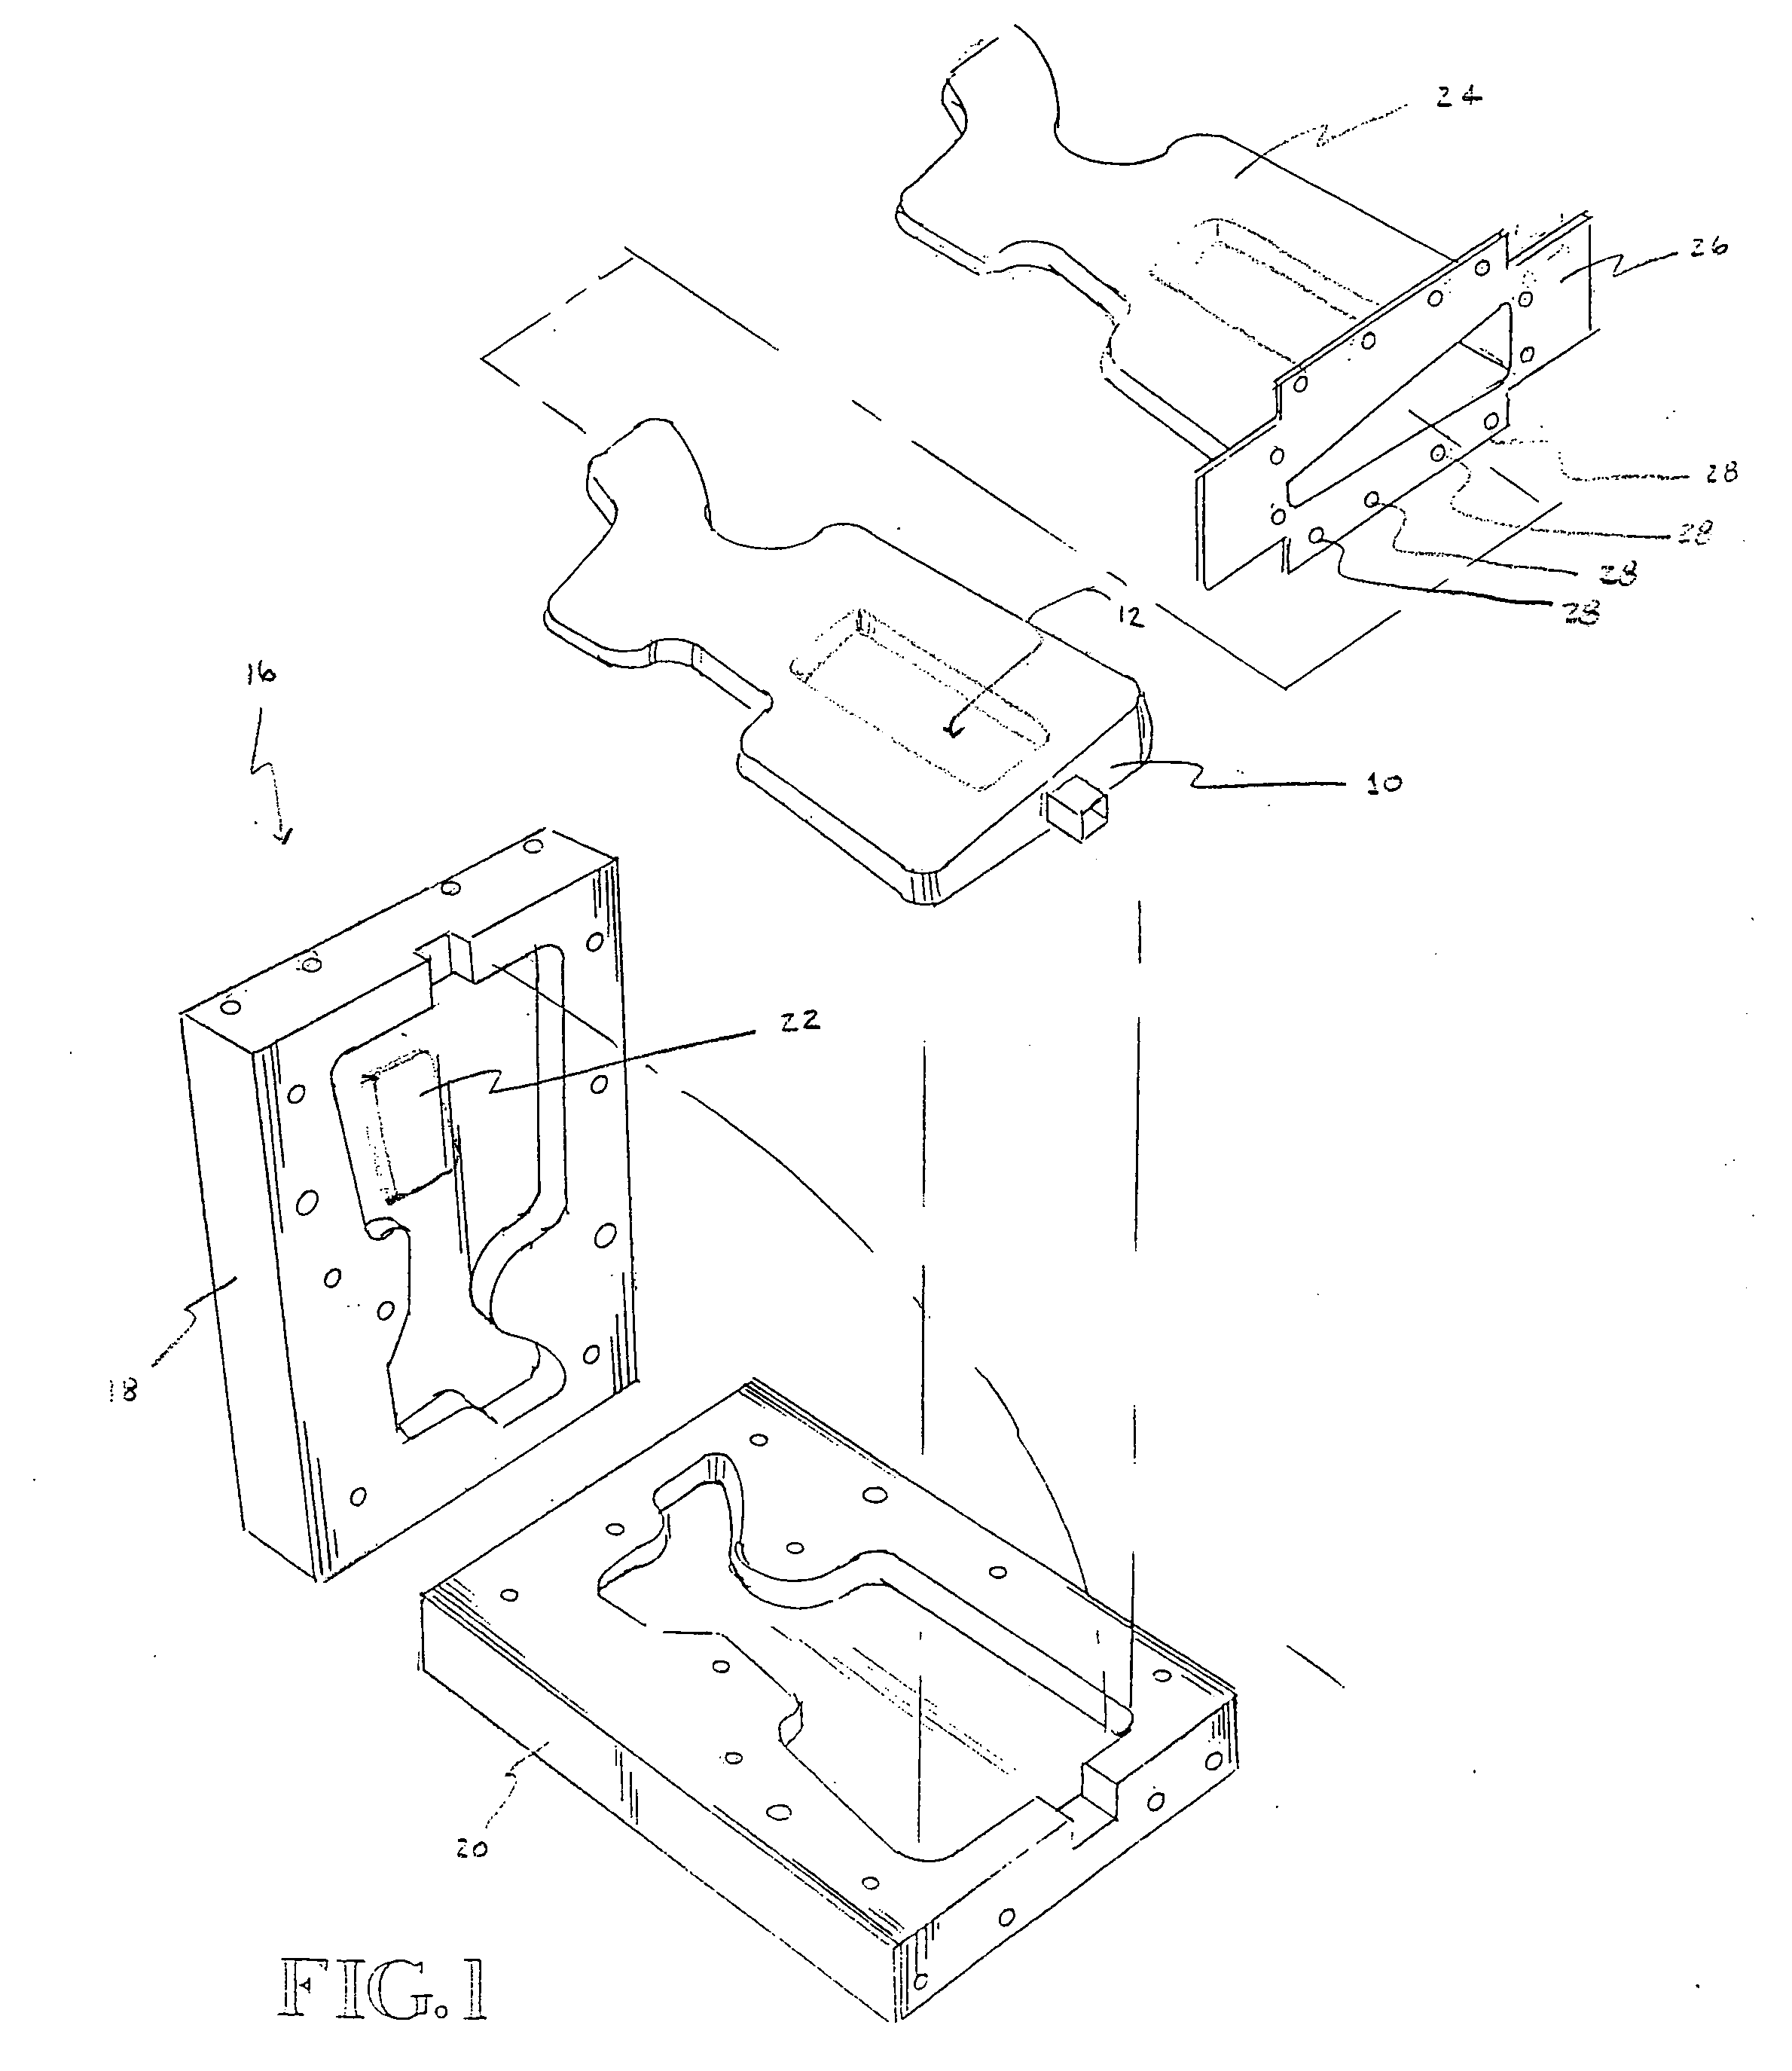 Methods for forming fiber reinforced composite parts having one or more selectively positioned core, structural insert, or veneer pieces integrally associated therewith